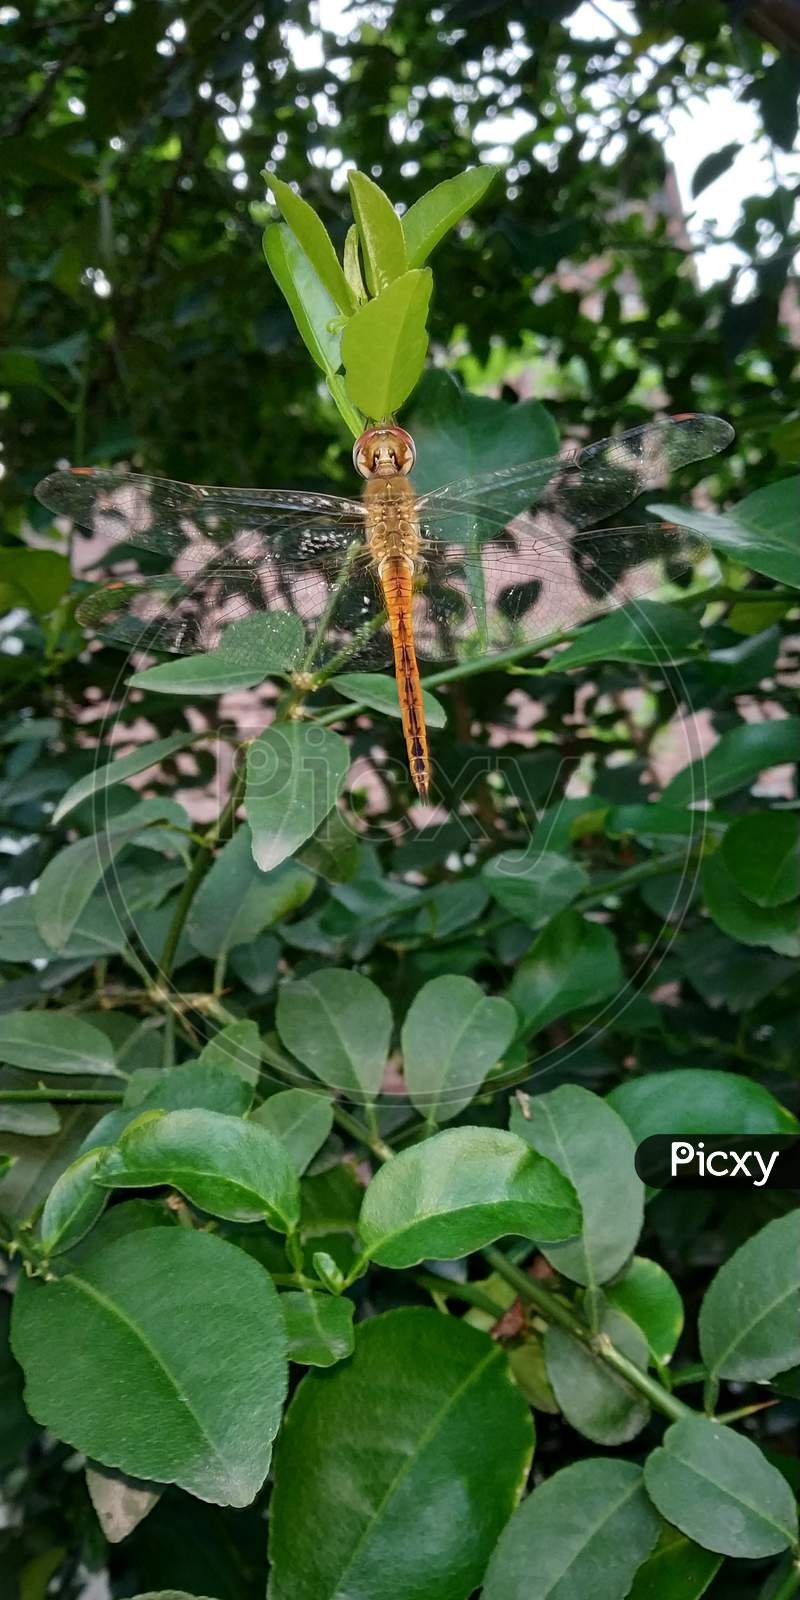 A Dragonfly hanging from a leaf